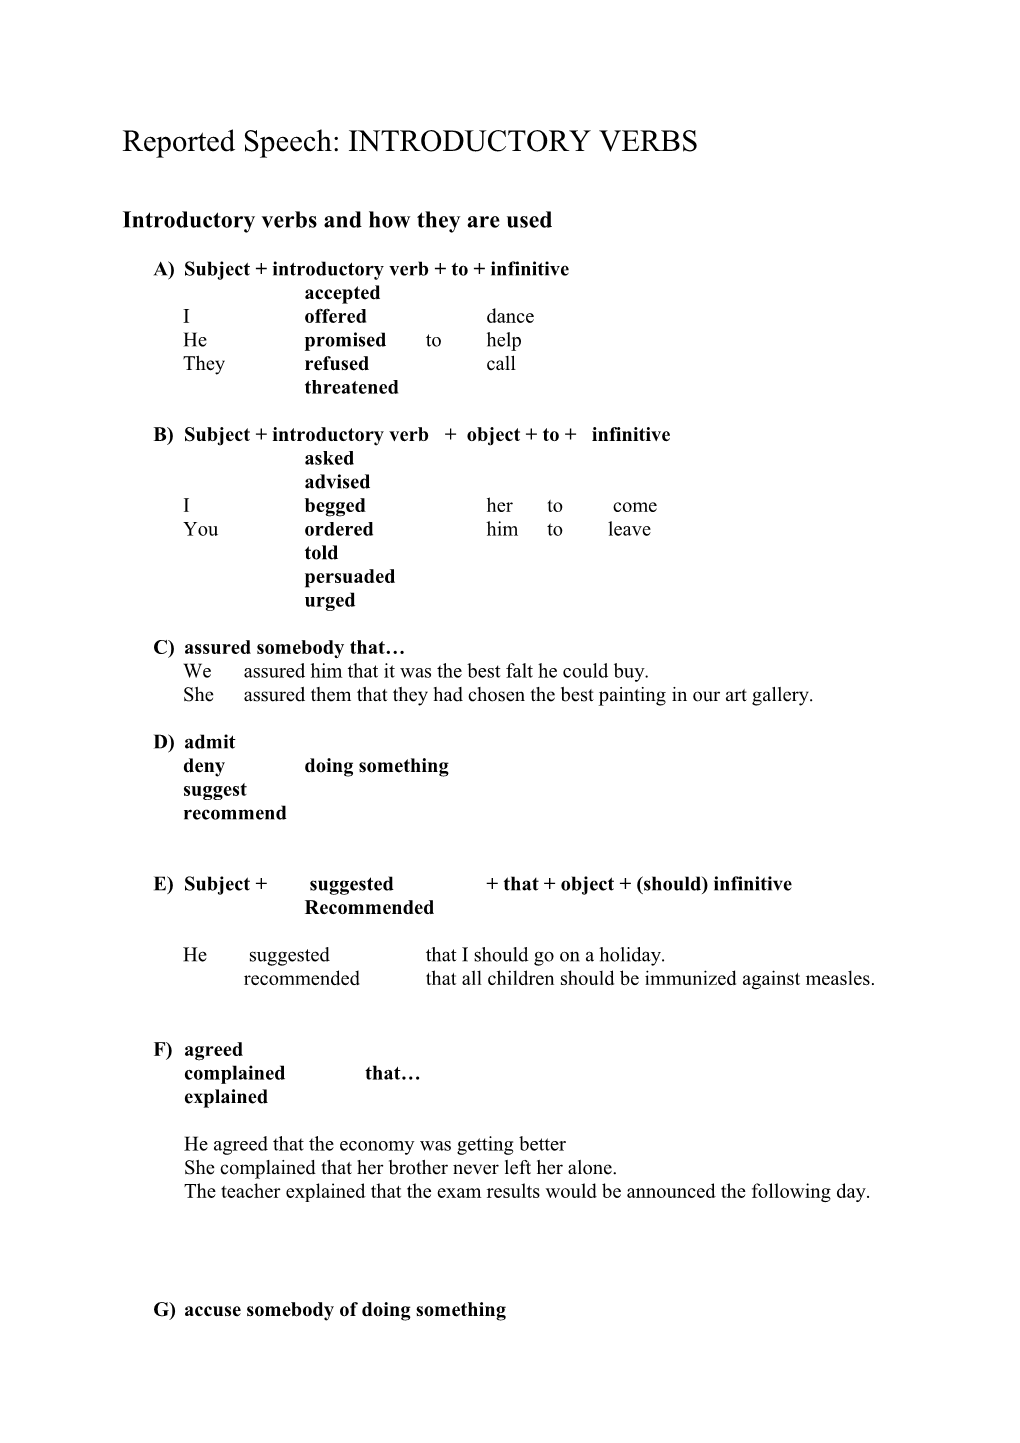 Reported Speech: INTRODUCTORY VERBS